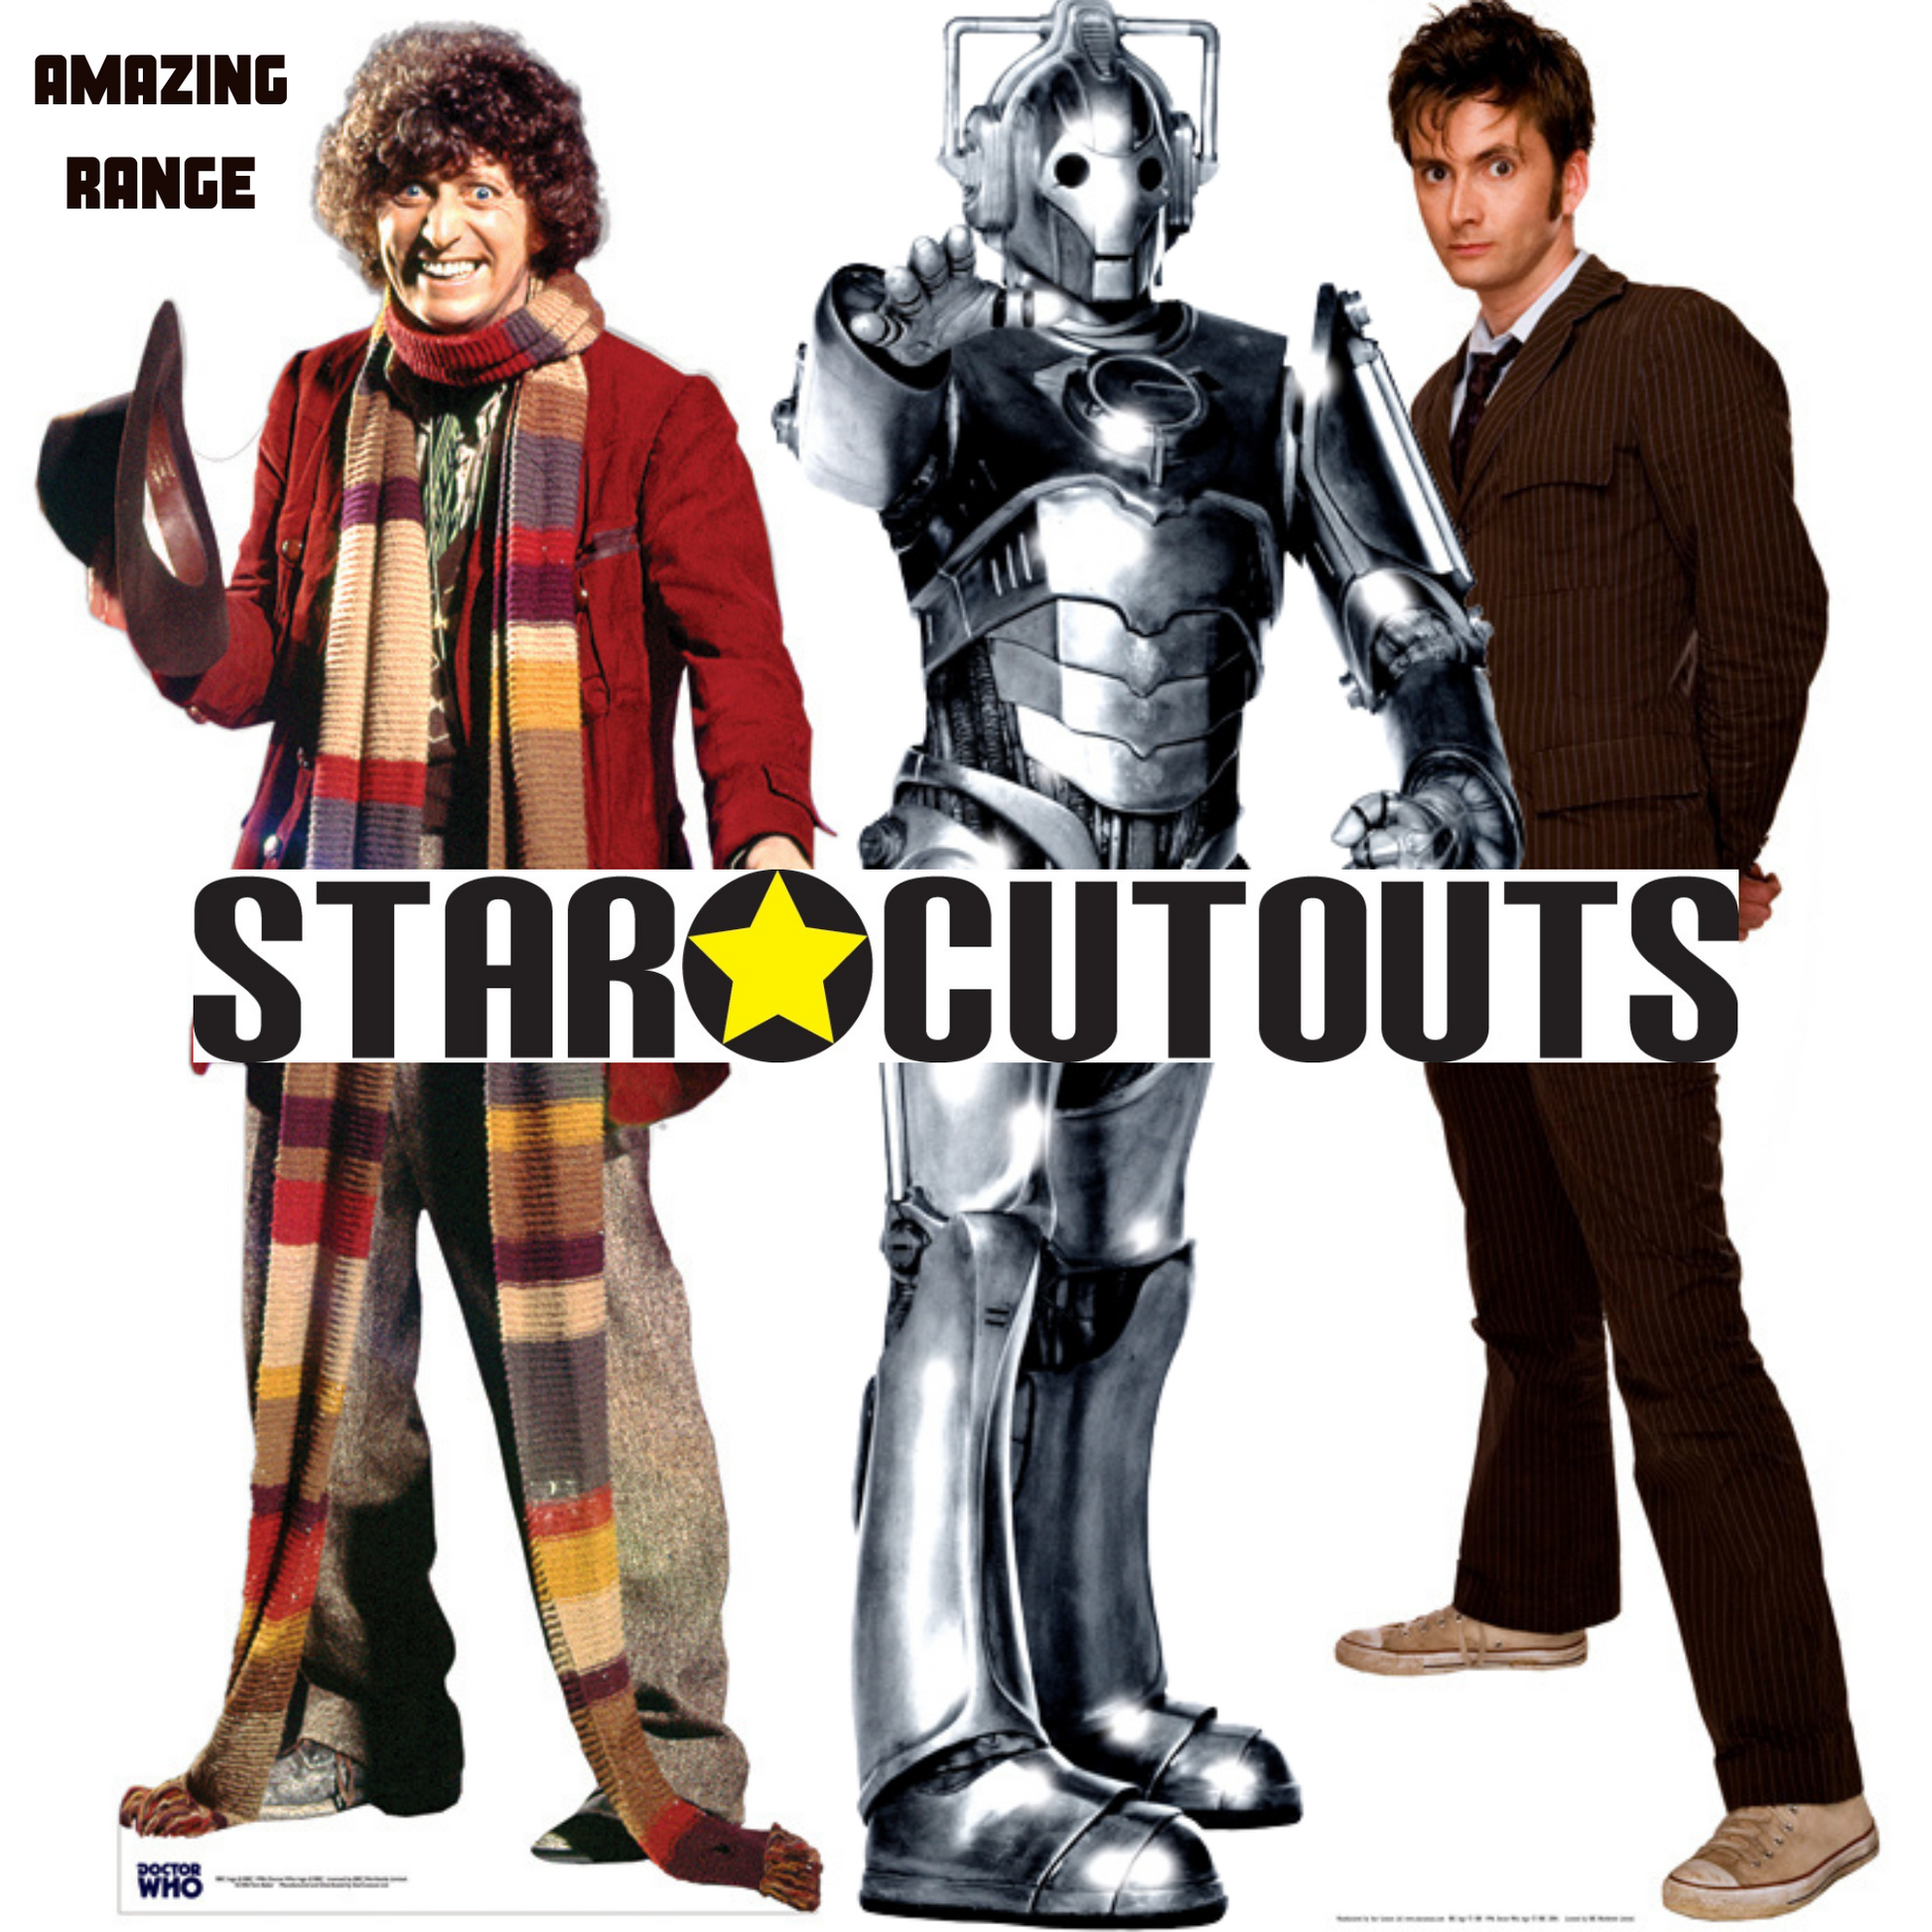 The 8th Doctor_Paul_McGann 50th Anniversary Special Cardboard Cut Out Height 185cm